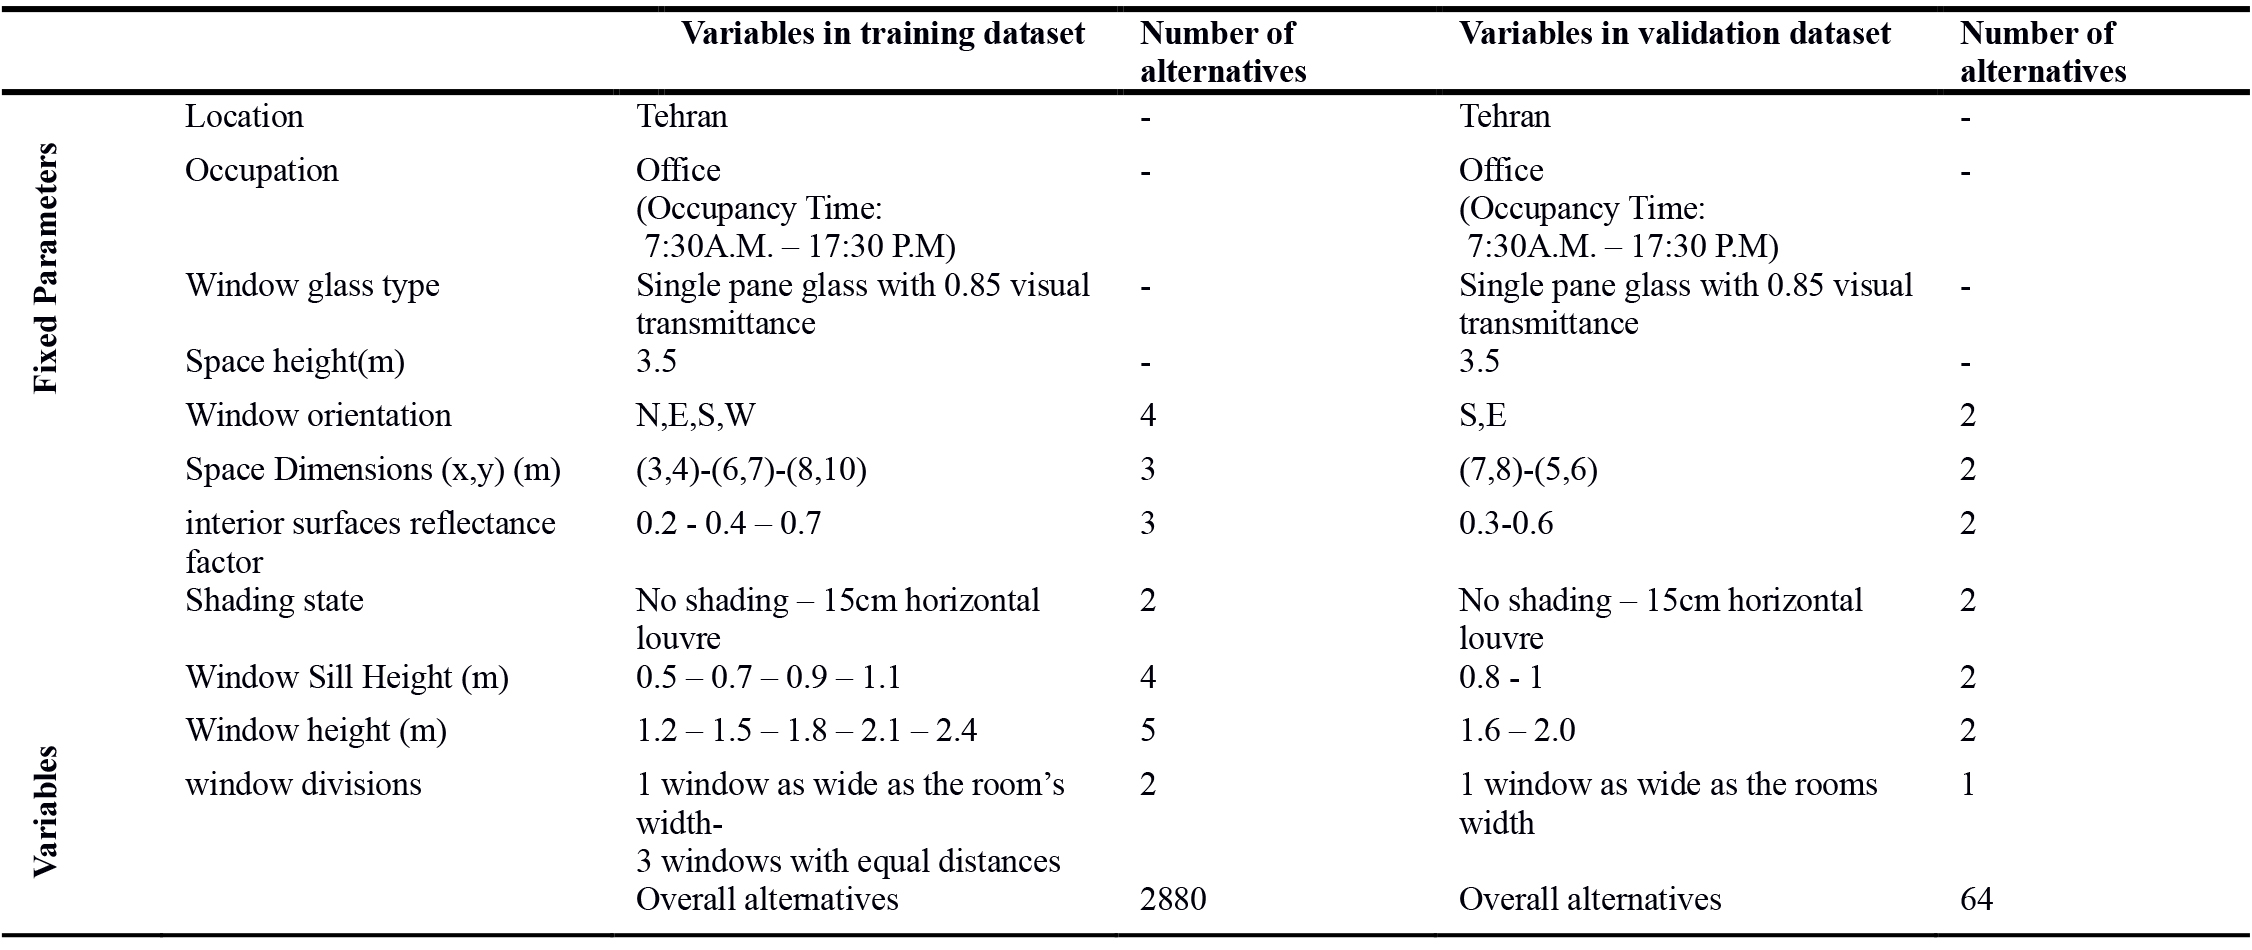 Selected parameters and their values in both datasets for model training and validation process.